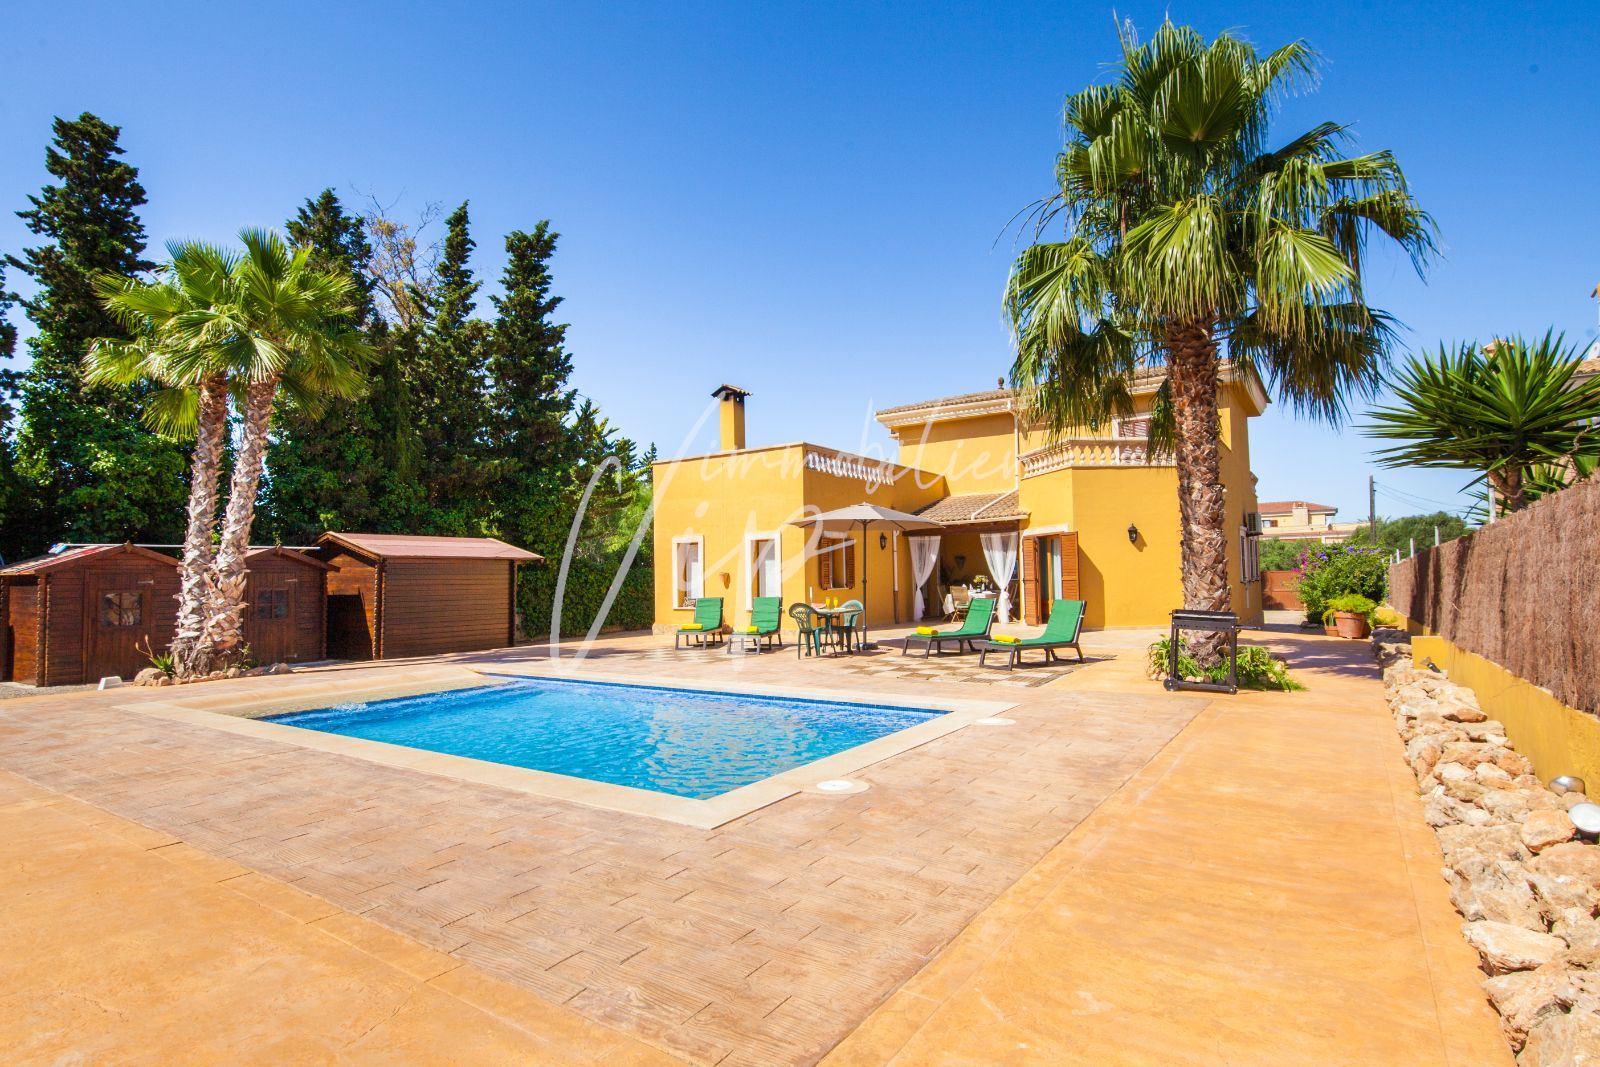 Villa in a residential area in the south of Palma